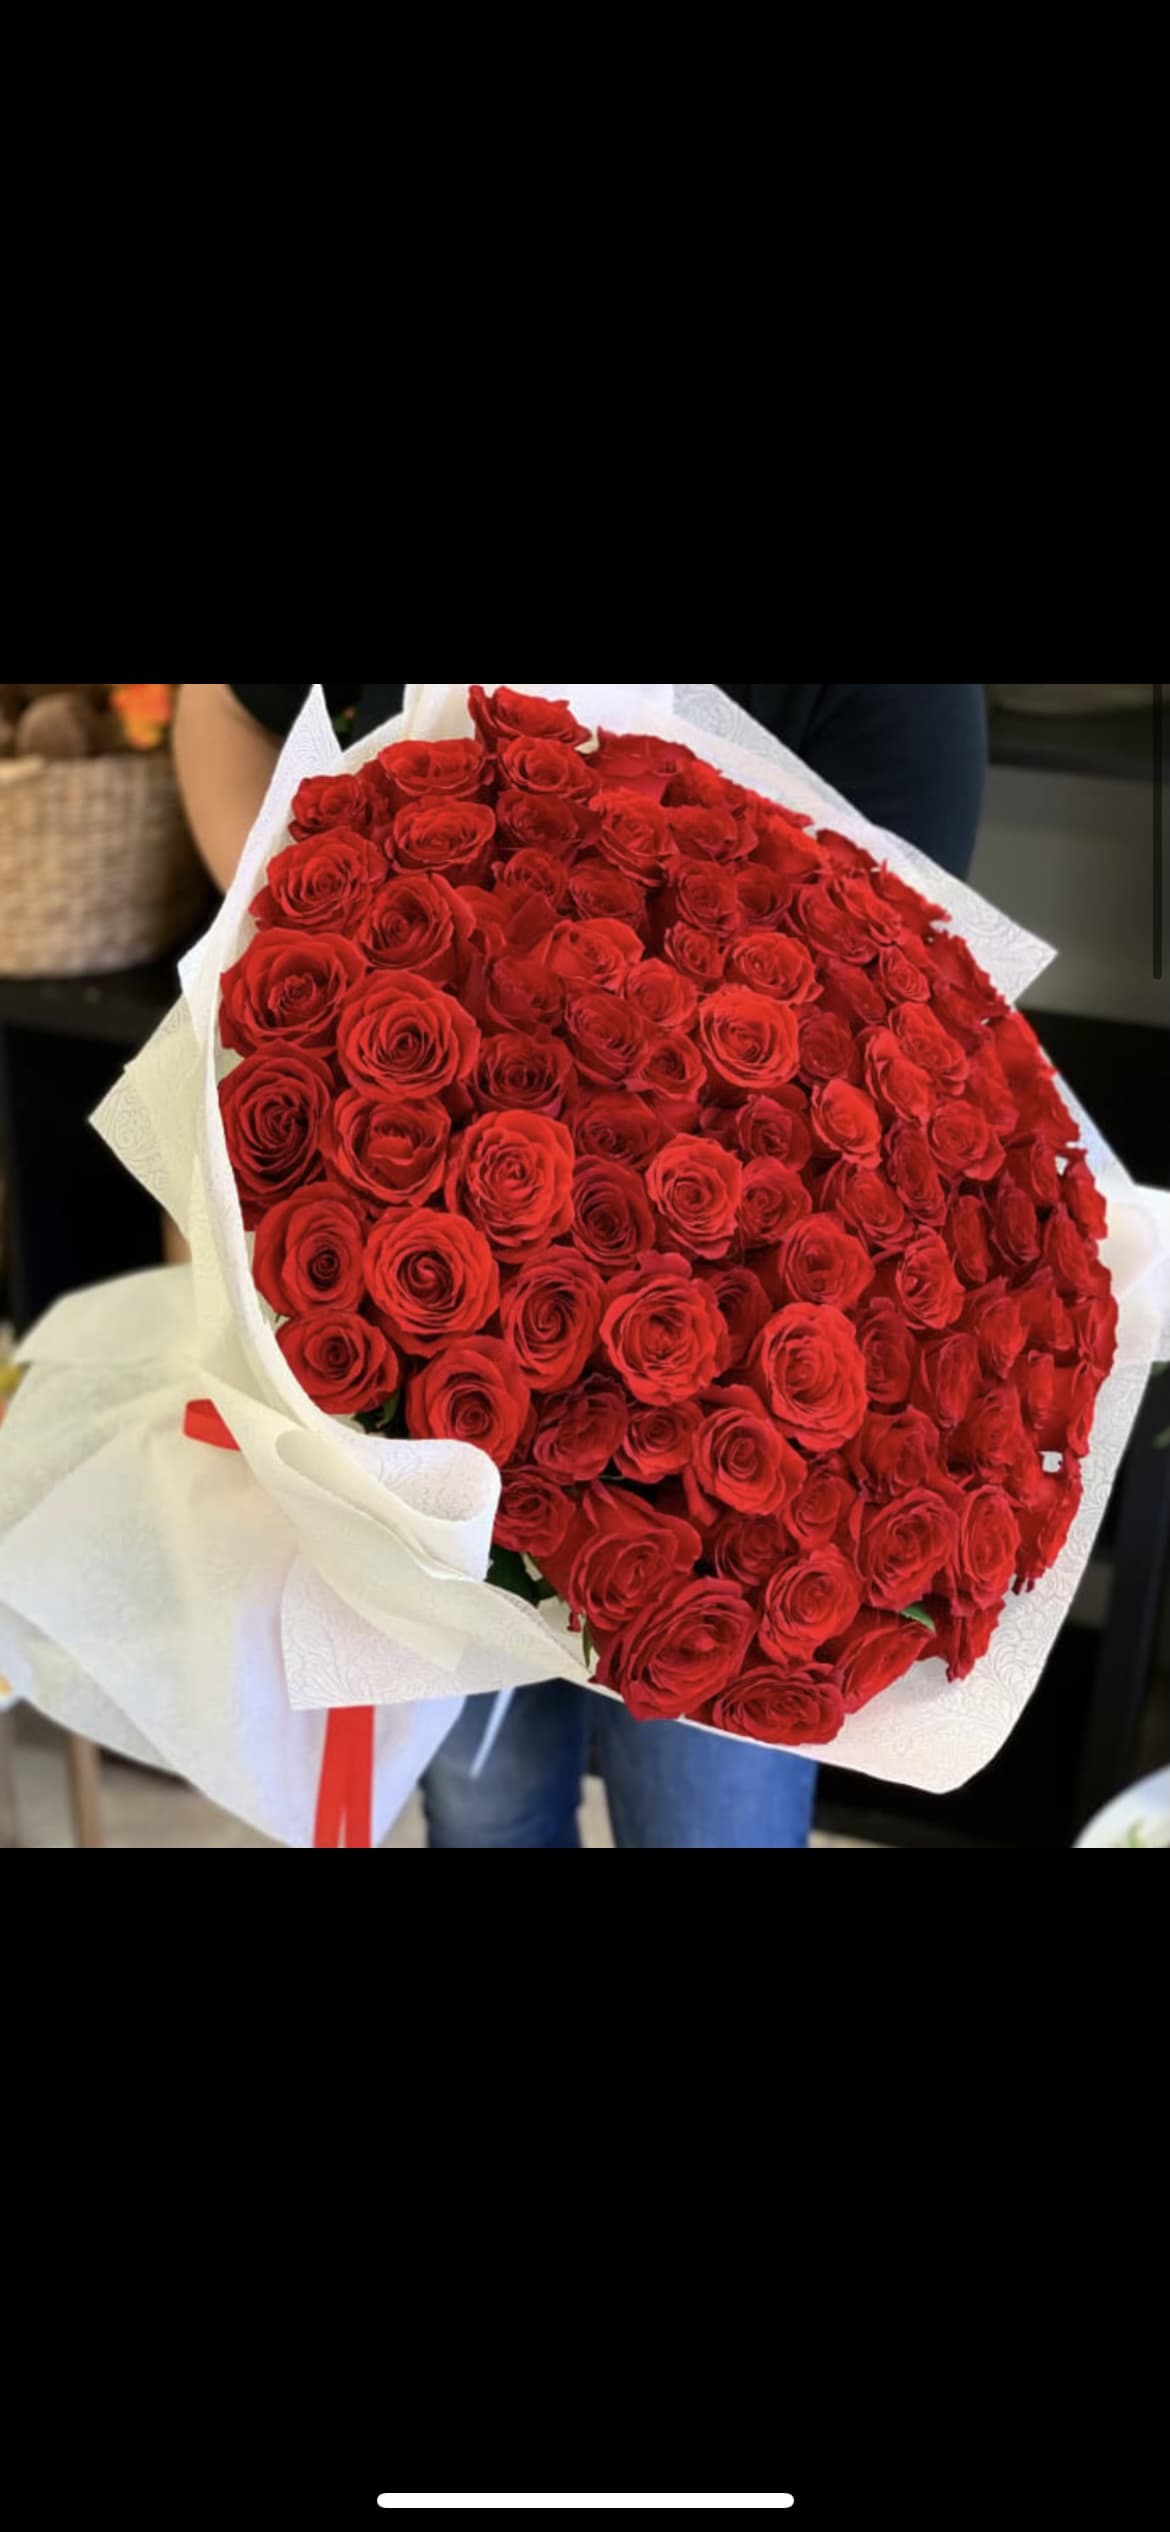 100 roses white wrap  - 100 long stem premium red roses wrapped in luxury papers and tissues with large bow 